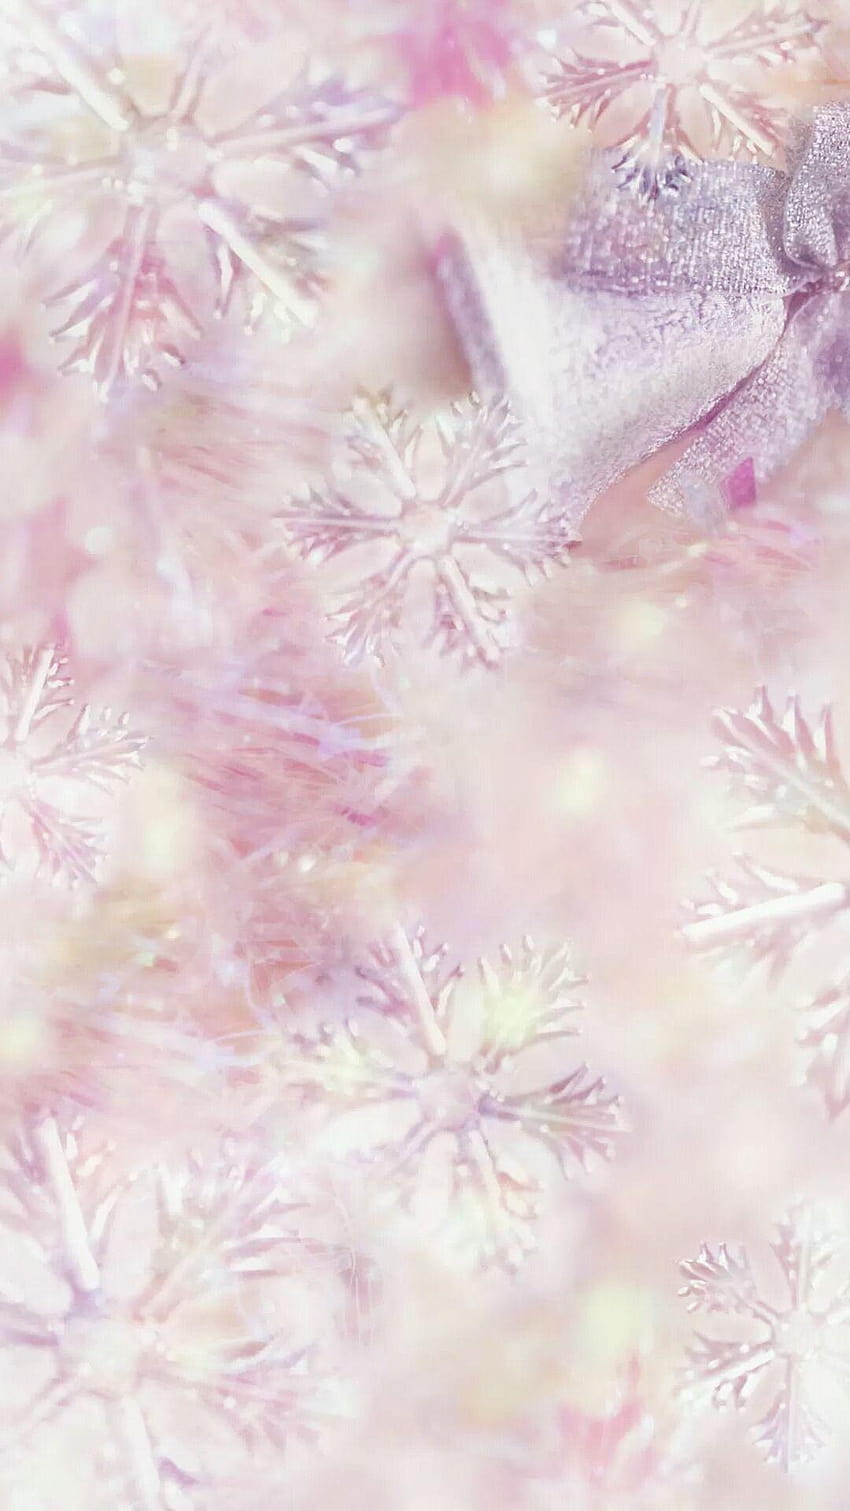 Dreamy snowflakes. Tap to see more winter frozen beautiful, winter pink HD phone wallpaper